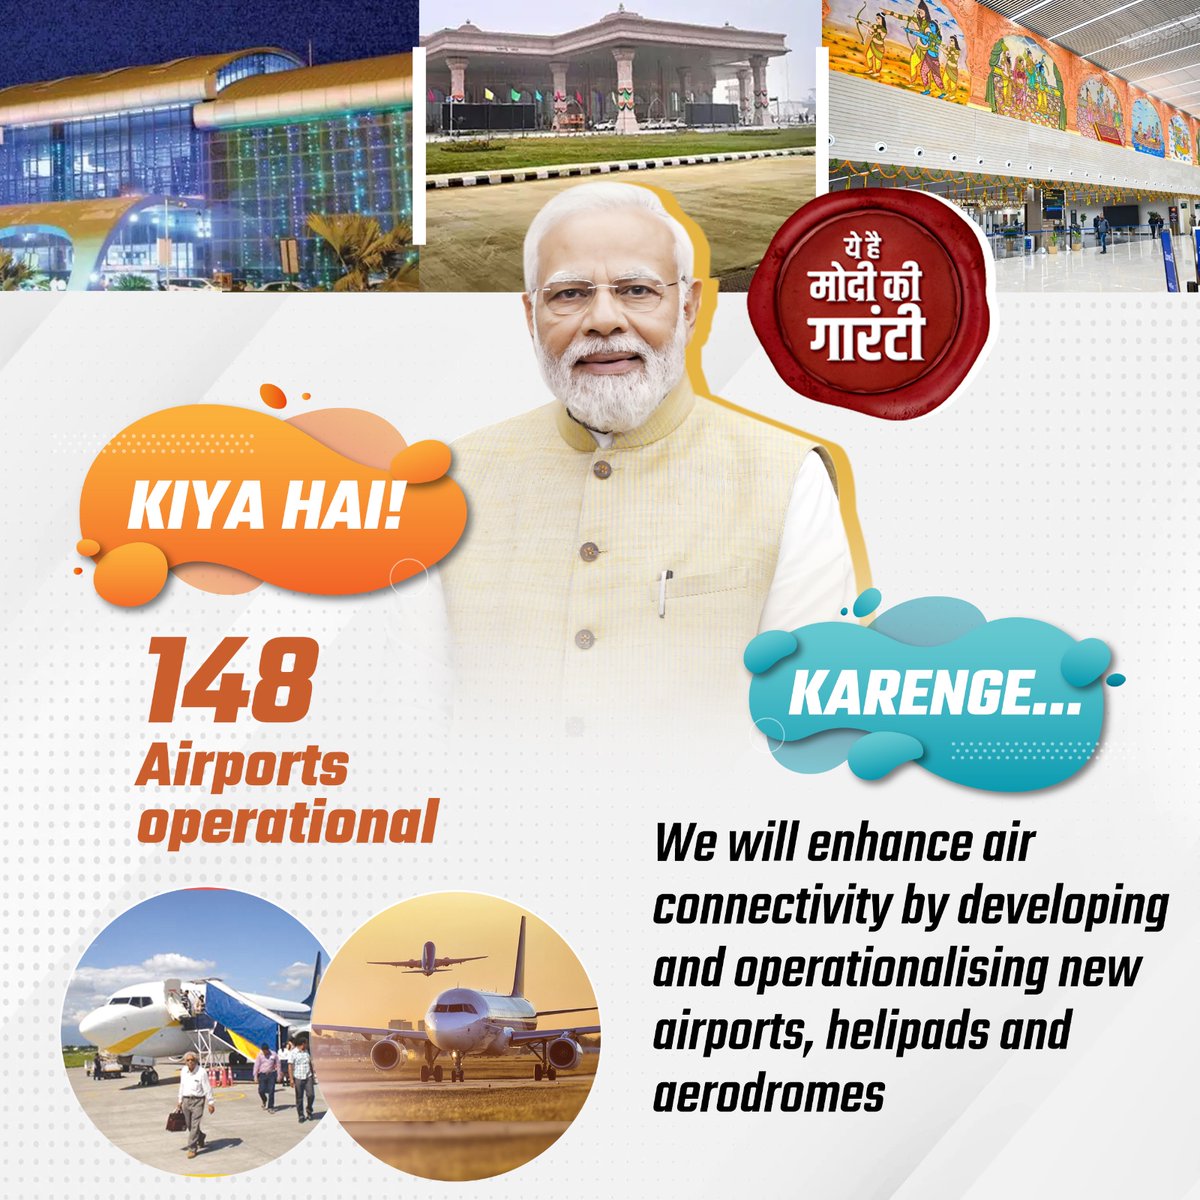 Developing airports for seamless connectivity.

#ModiKiGuarantee